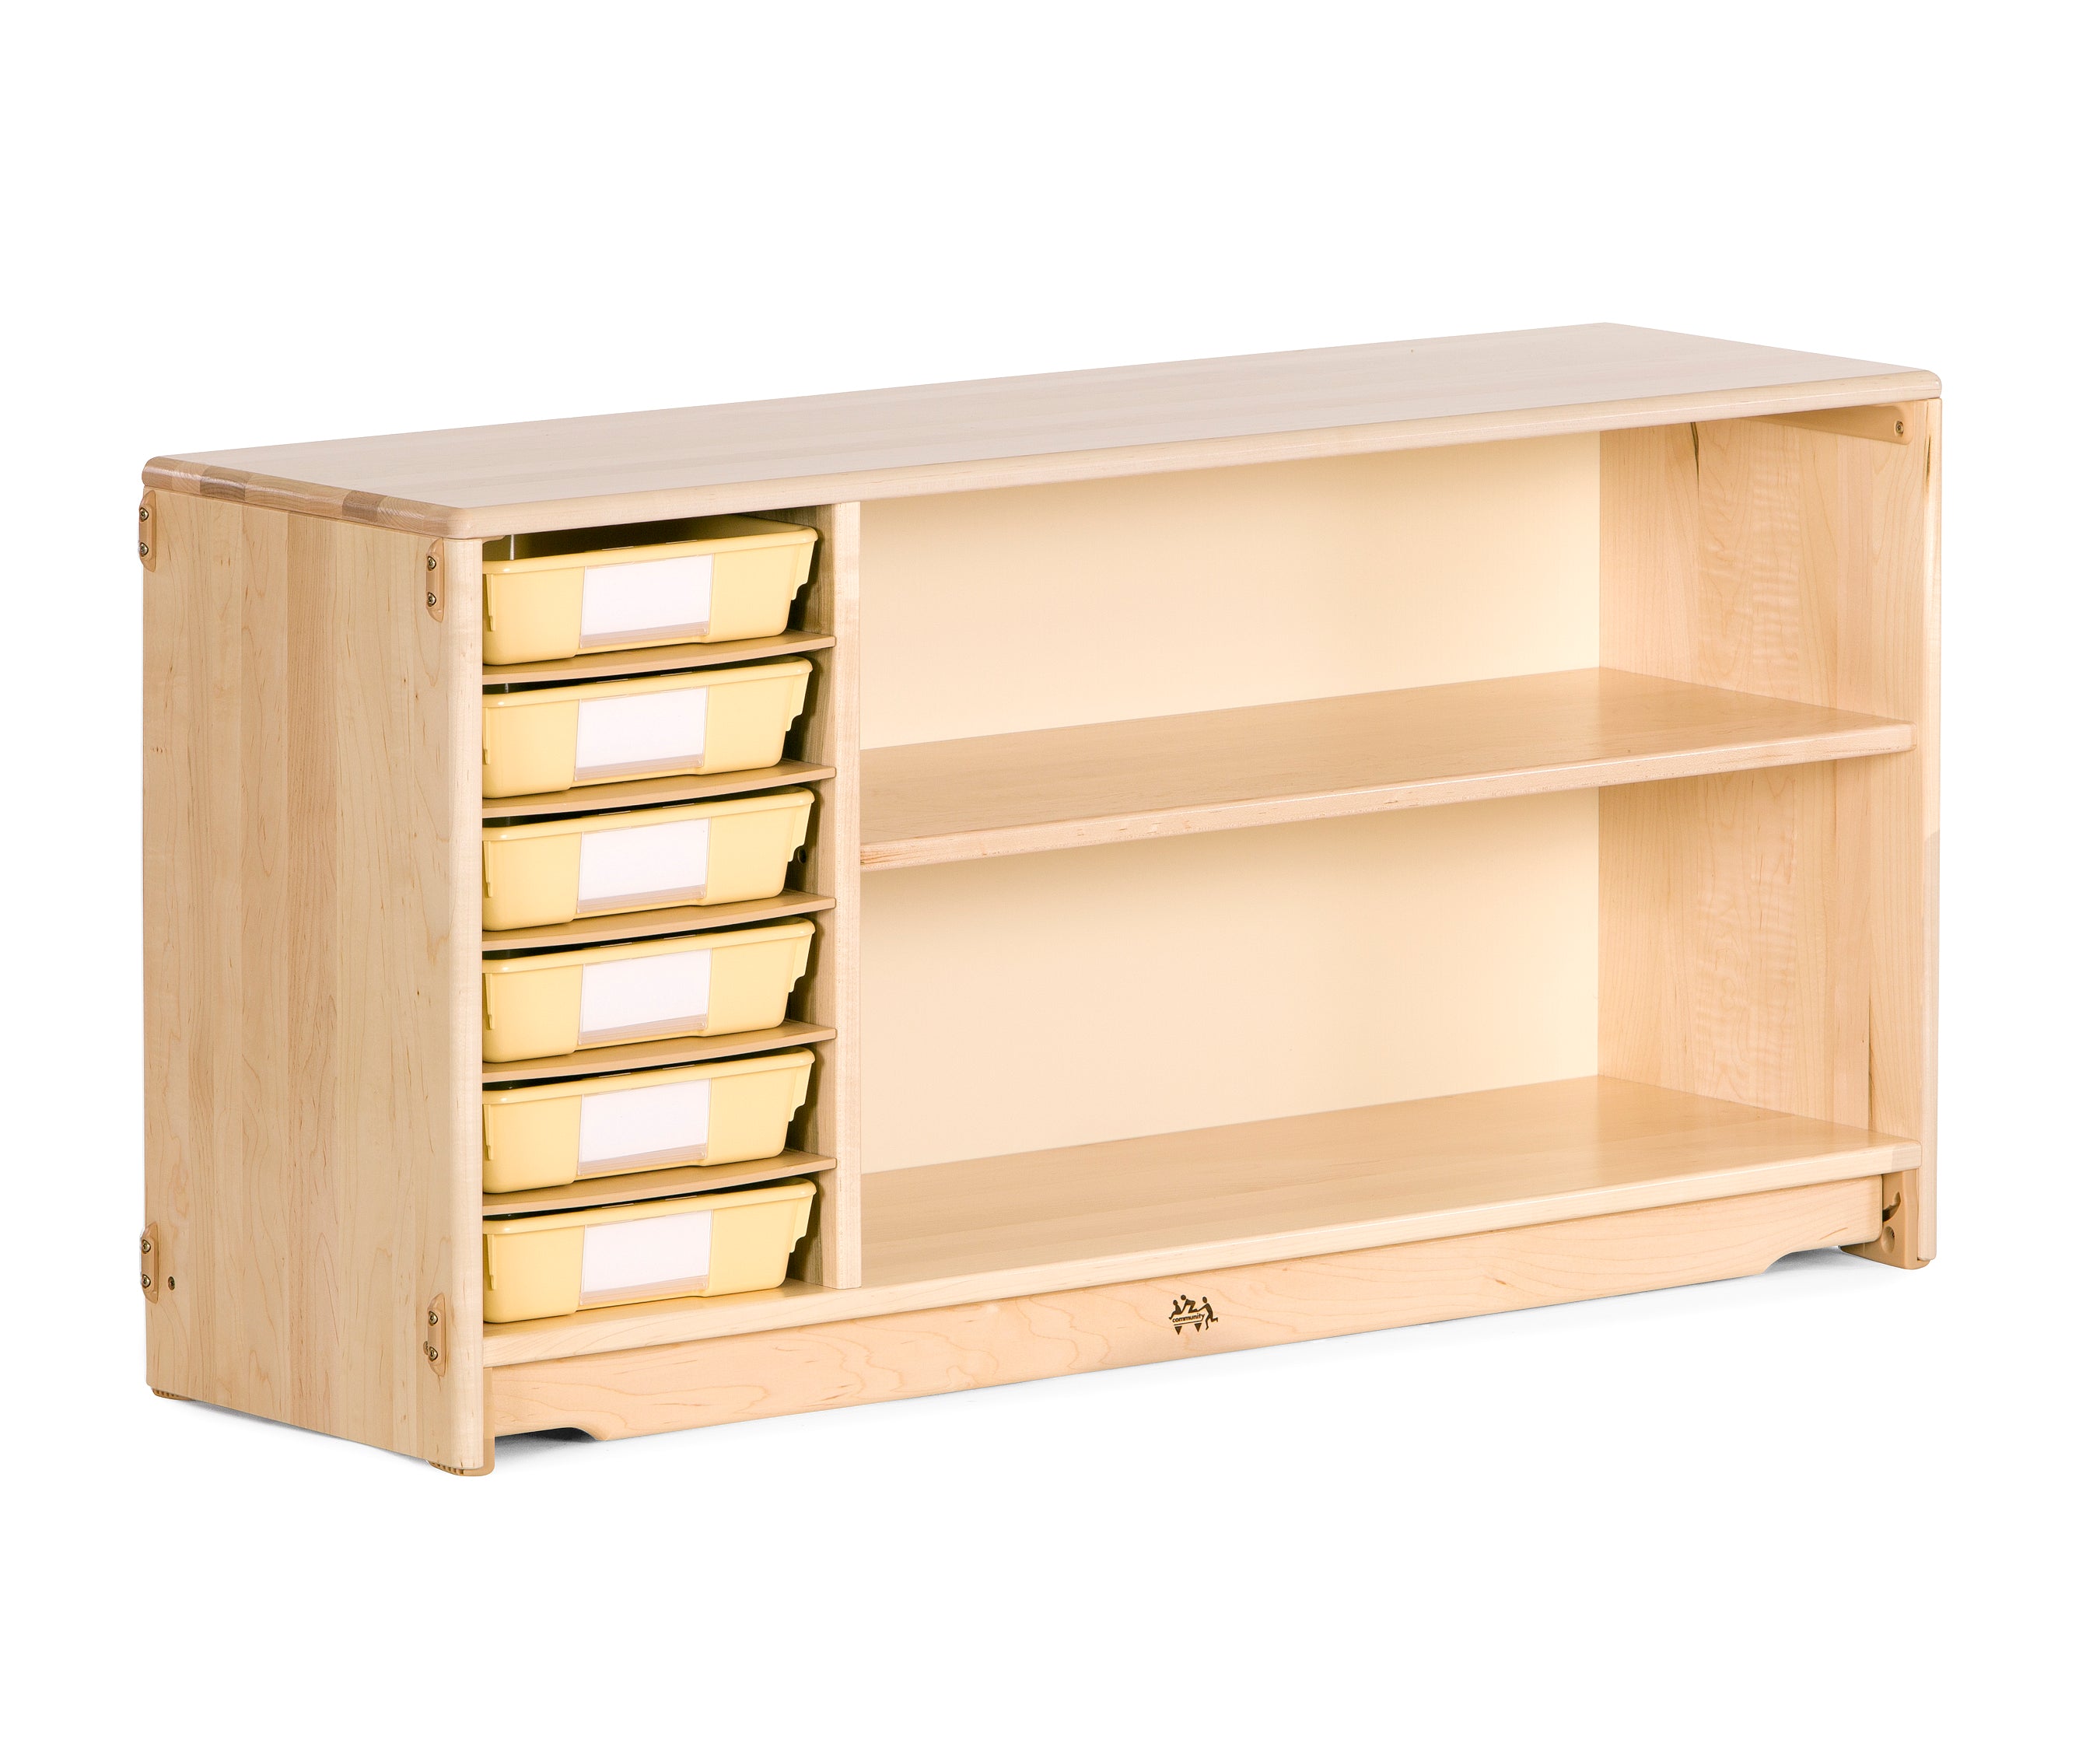 Multi-Storage Shelf 4' W x 24" H with Totes or Baskets by Community Playthings - louisekool